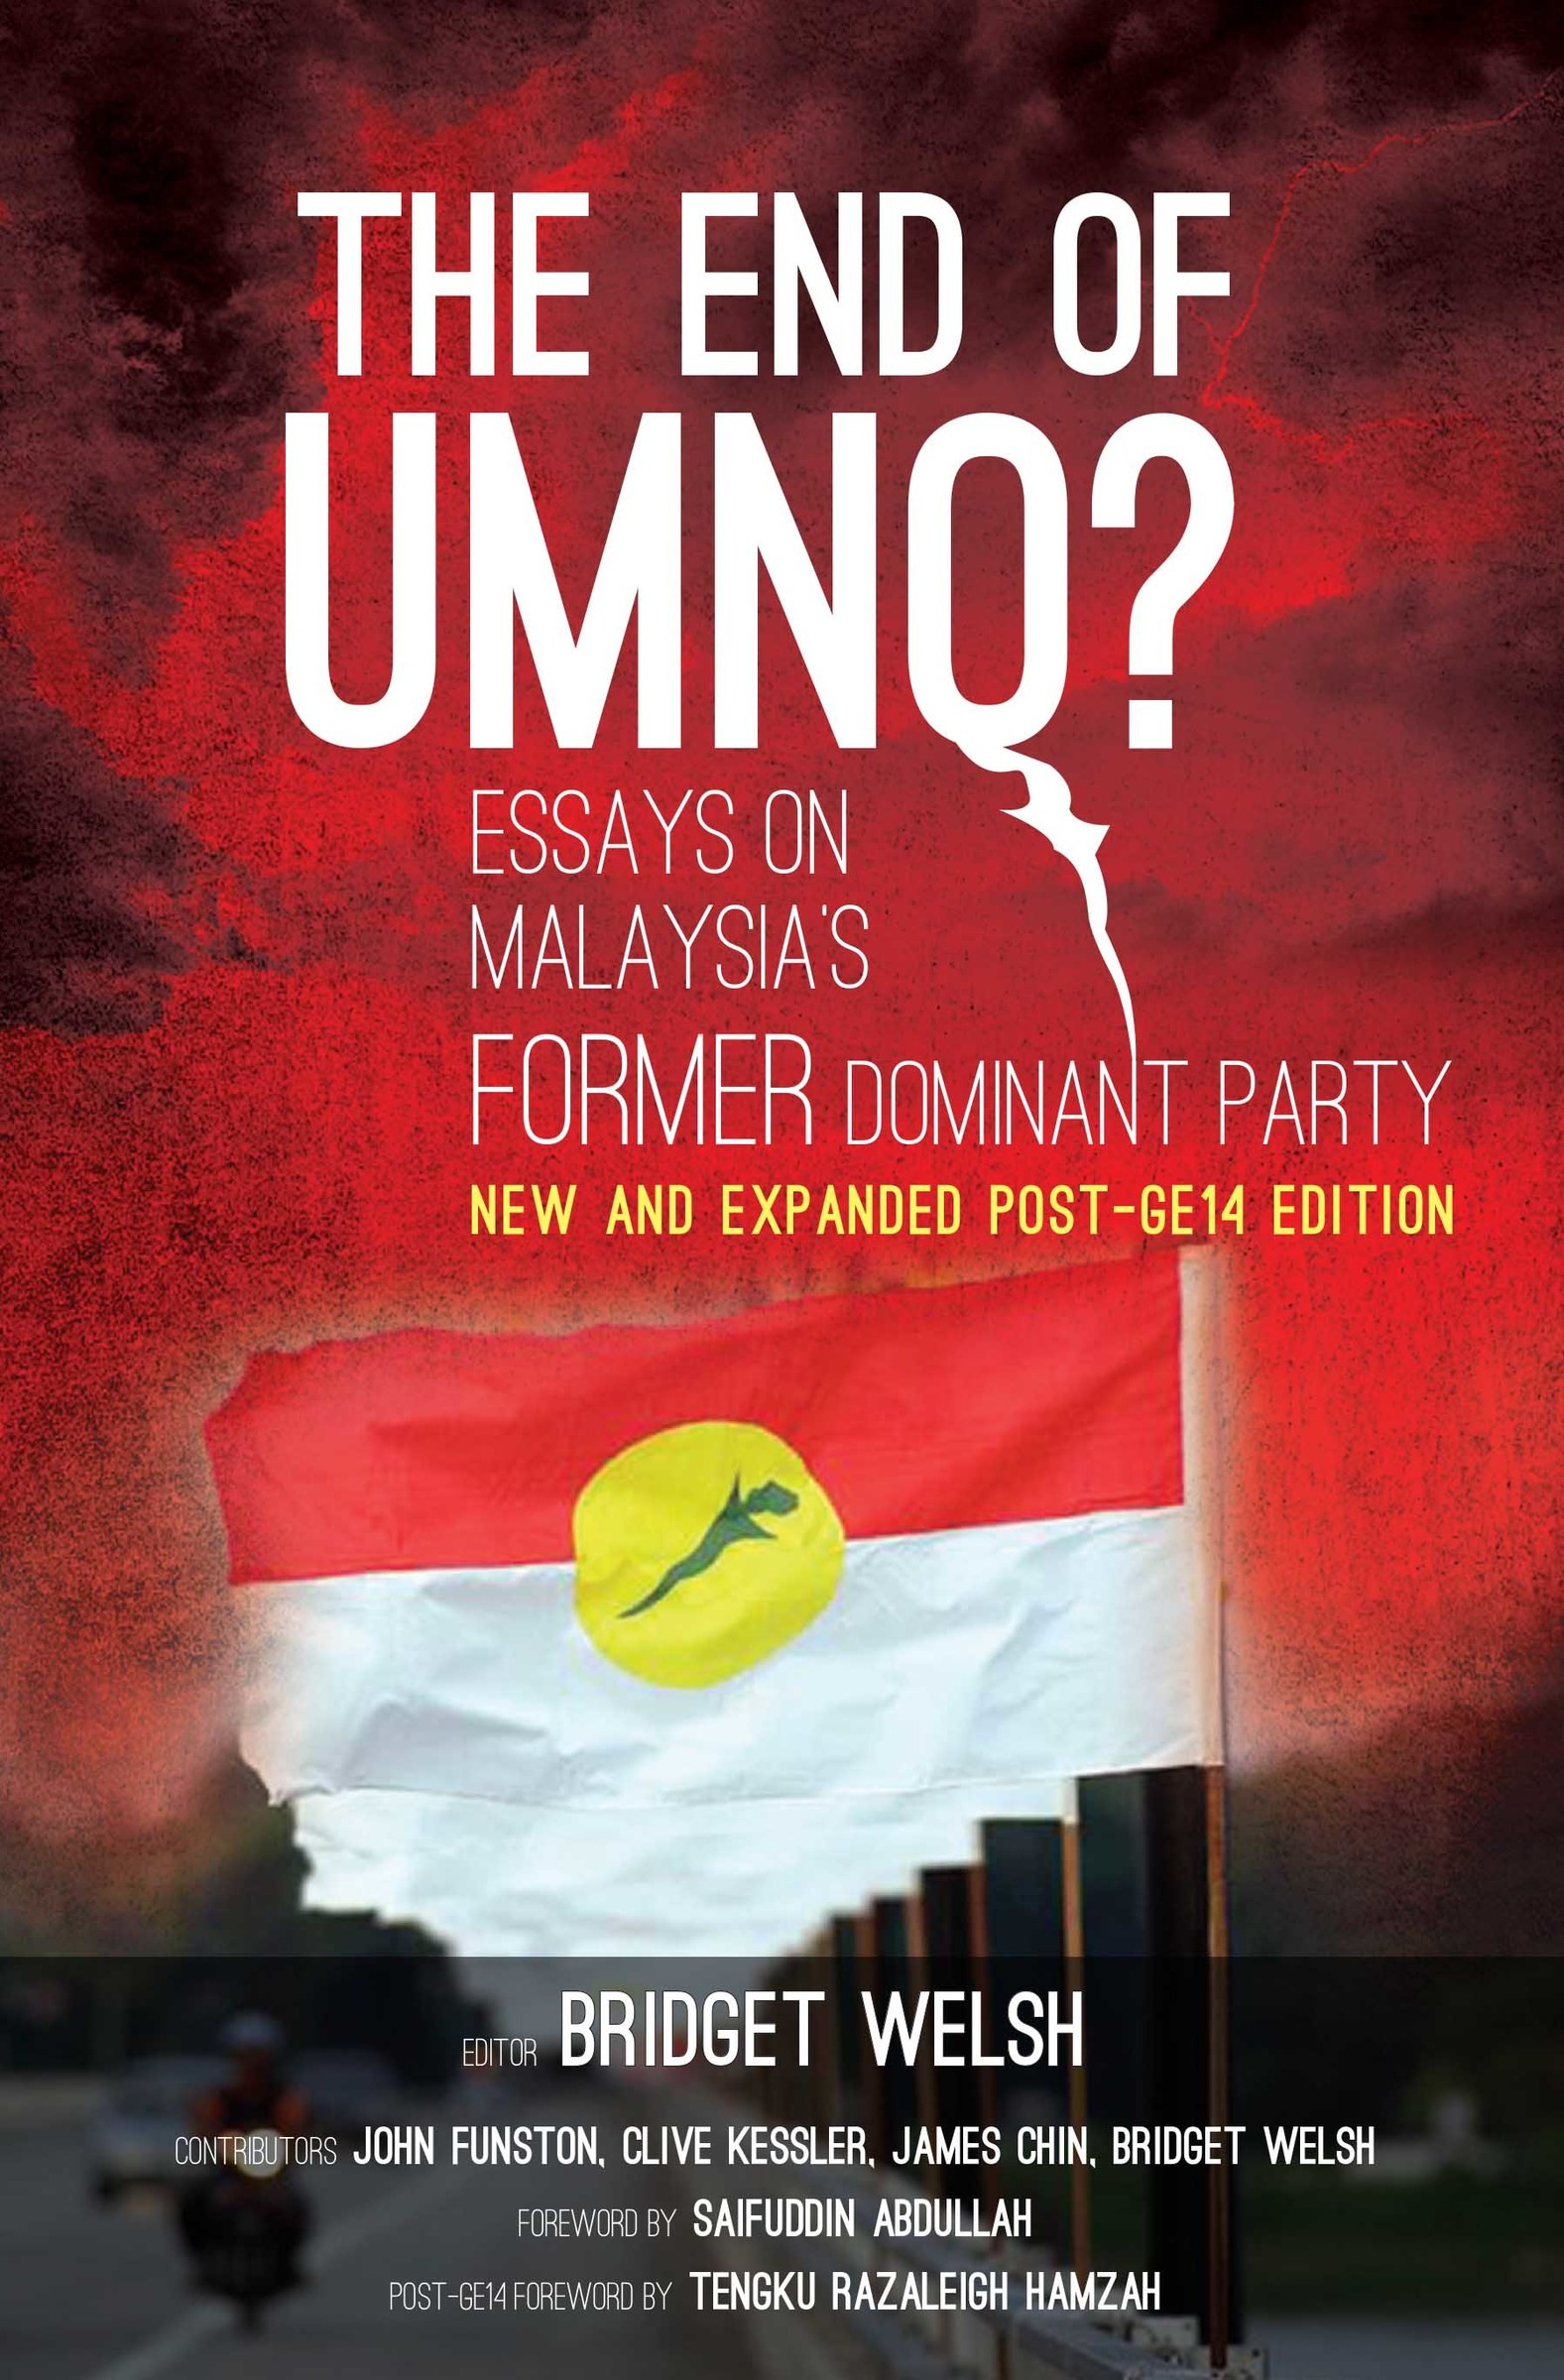 The End of UMNO? Essays on Malaysia's Dominant Party